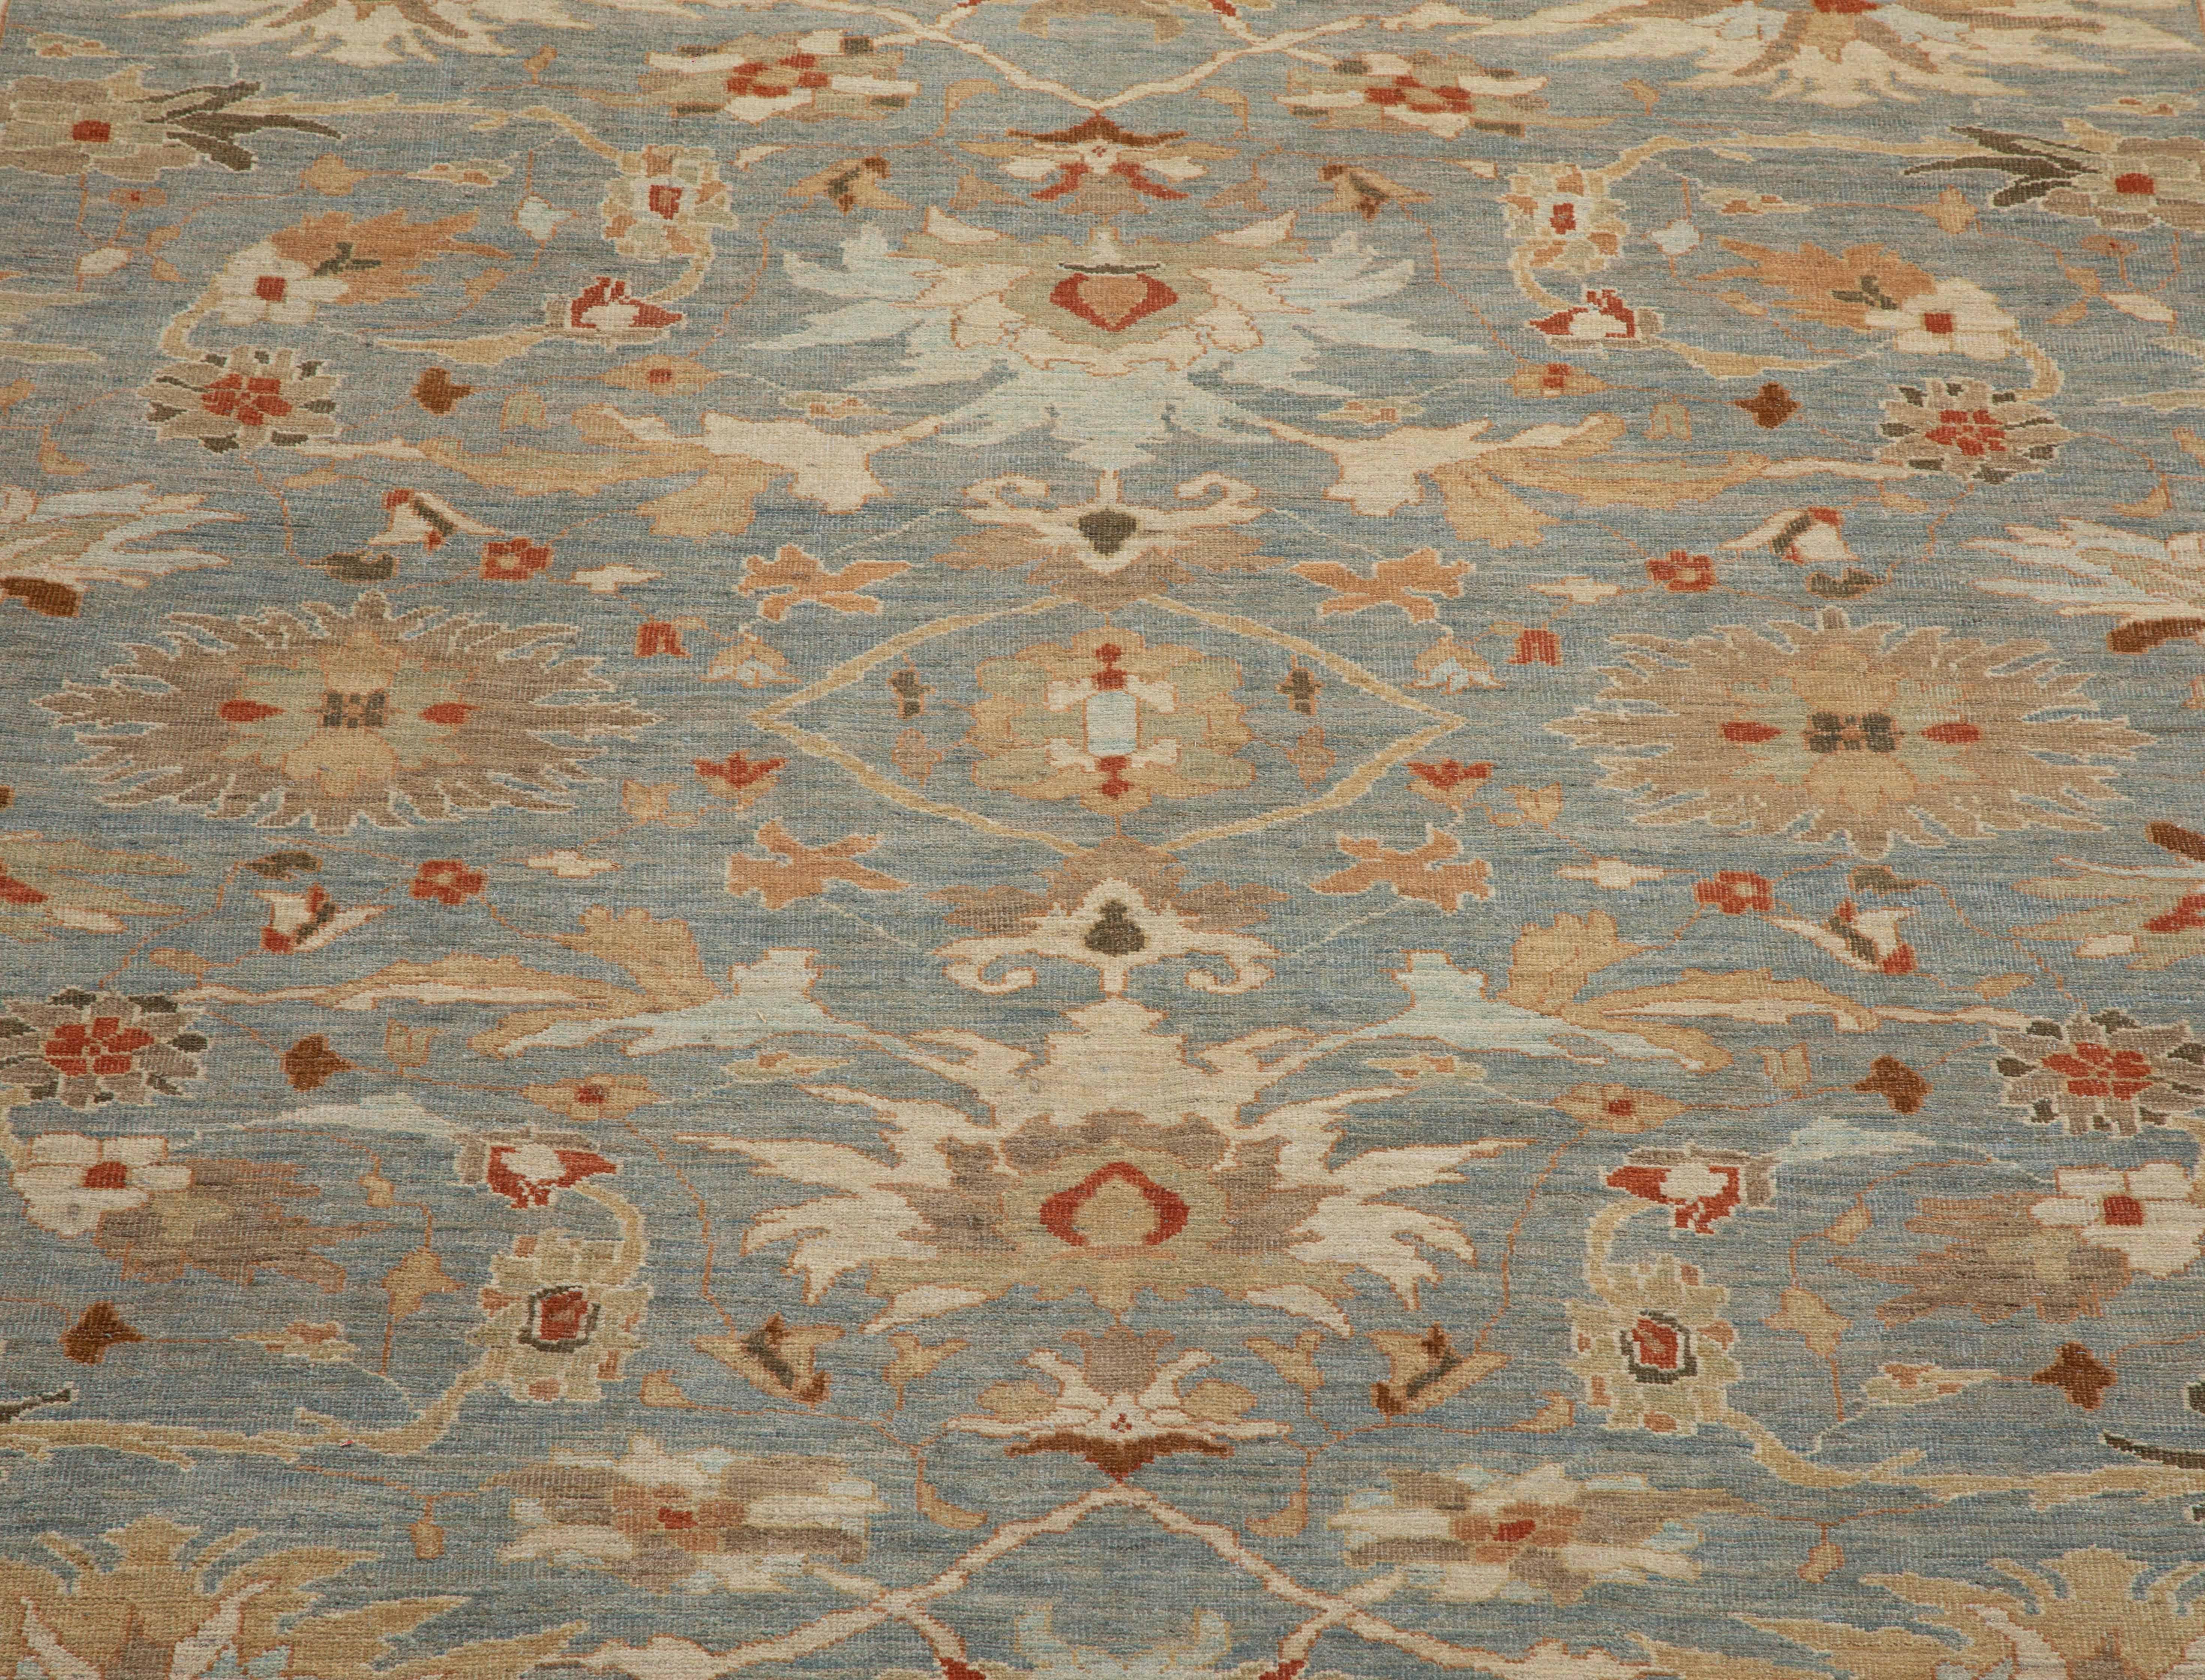 Contemporary Turkish Sultanabad Rug with Blue Gray Field of Colored Flower Detai In New Condition For Sale In Dallas, TX